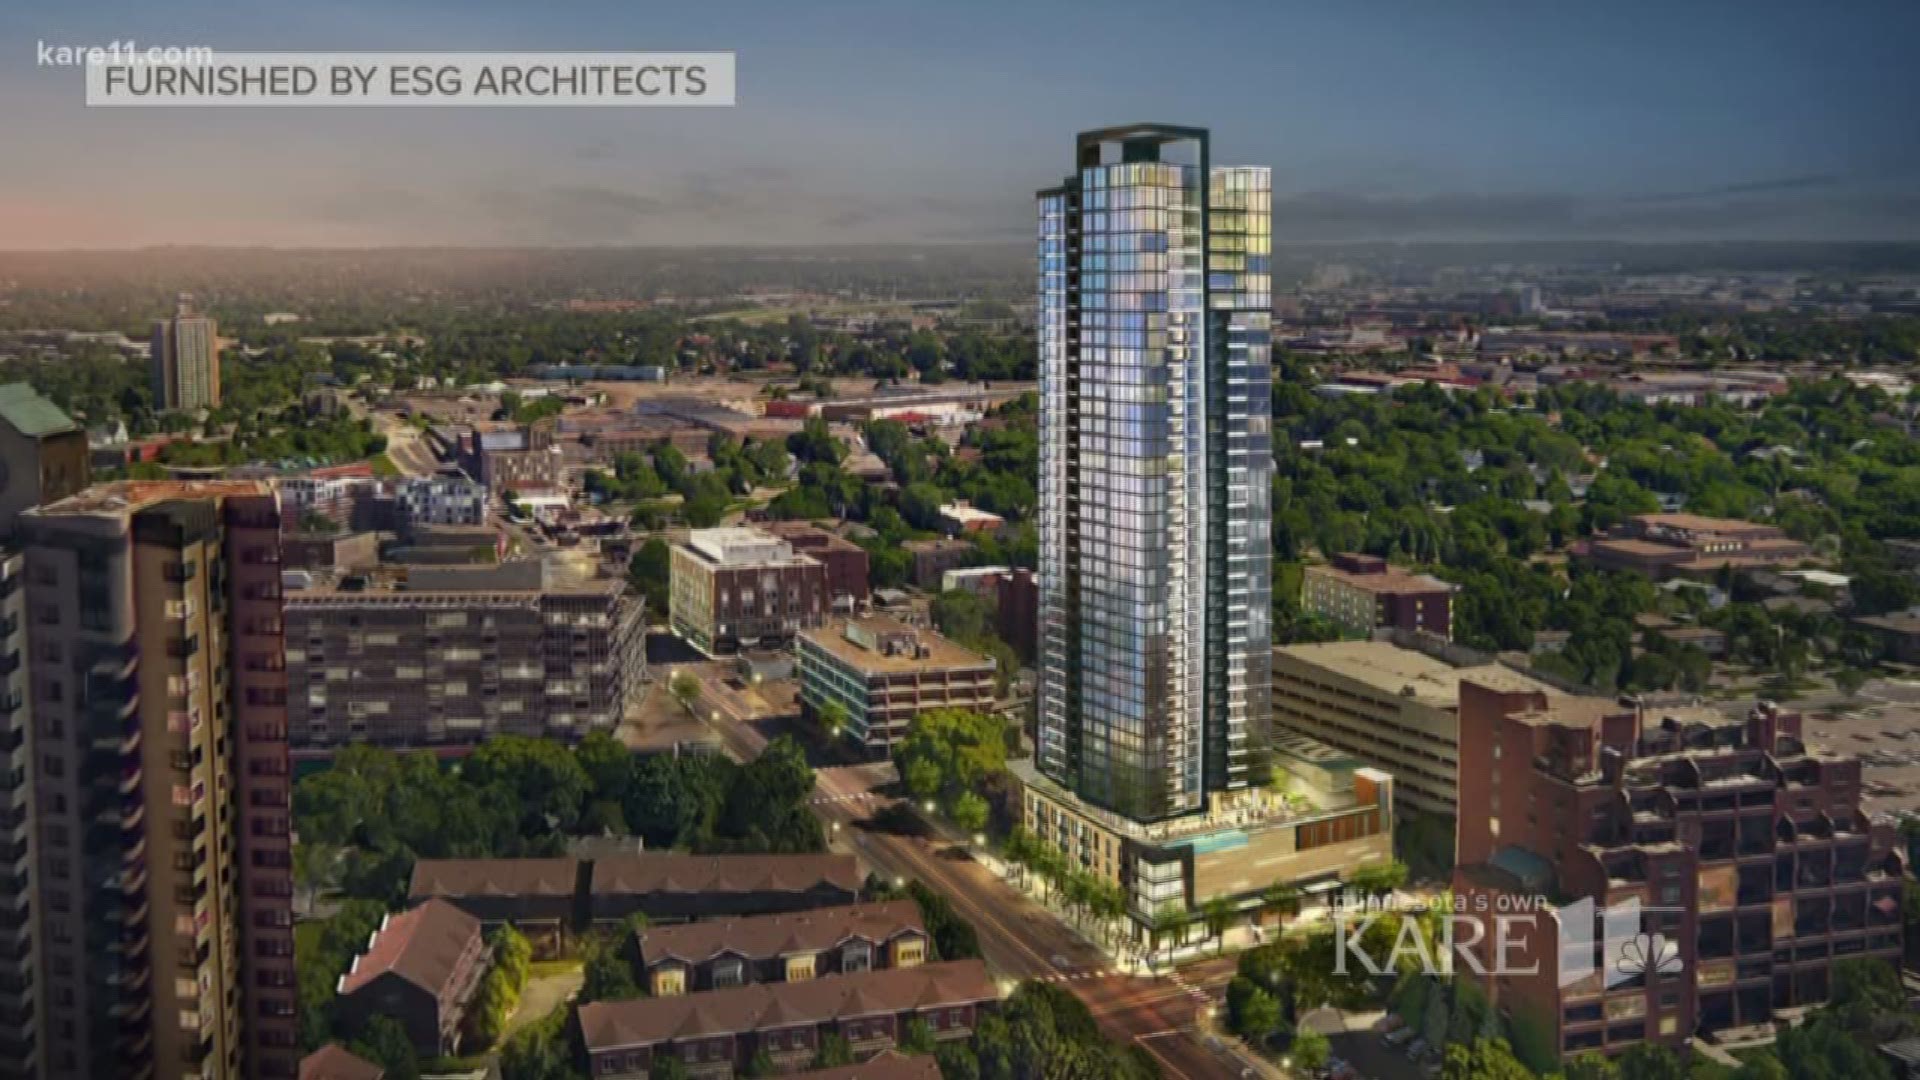 Plans for 40-story condo tower in Minneapolis moves forward